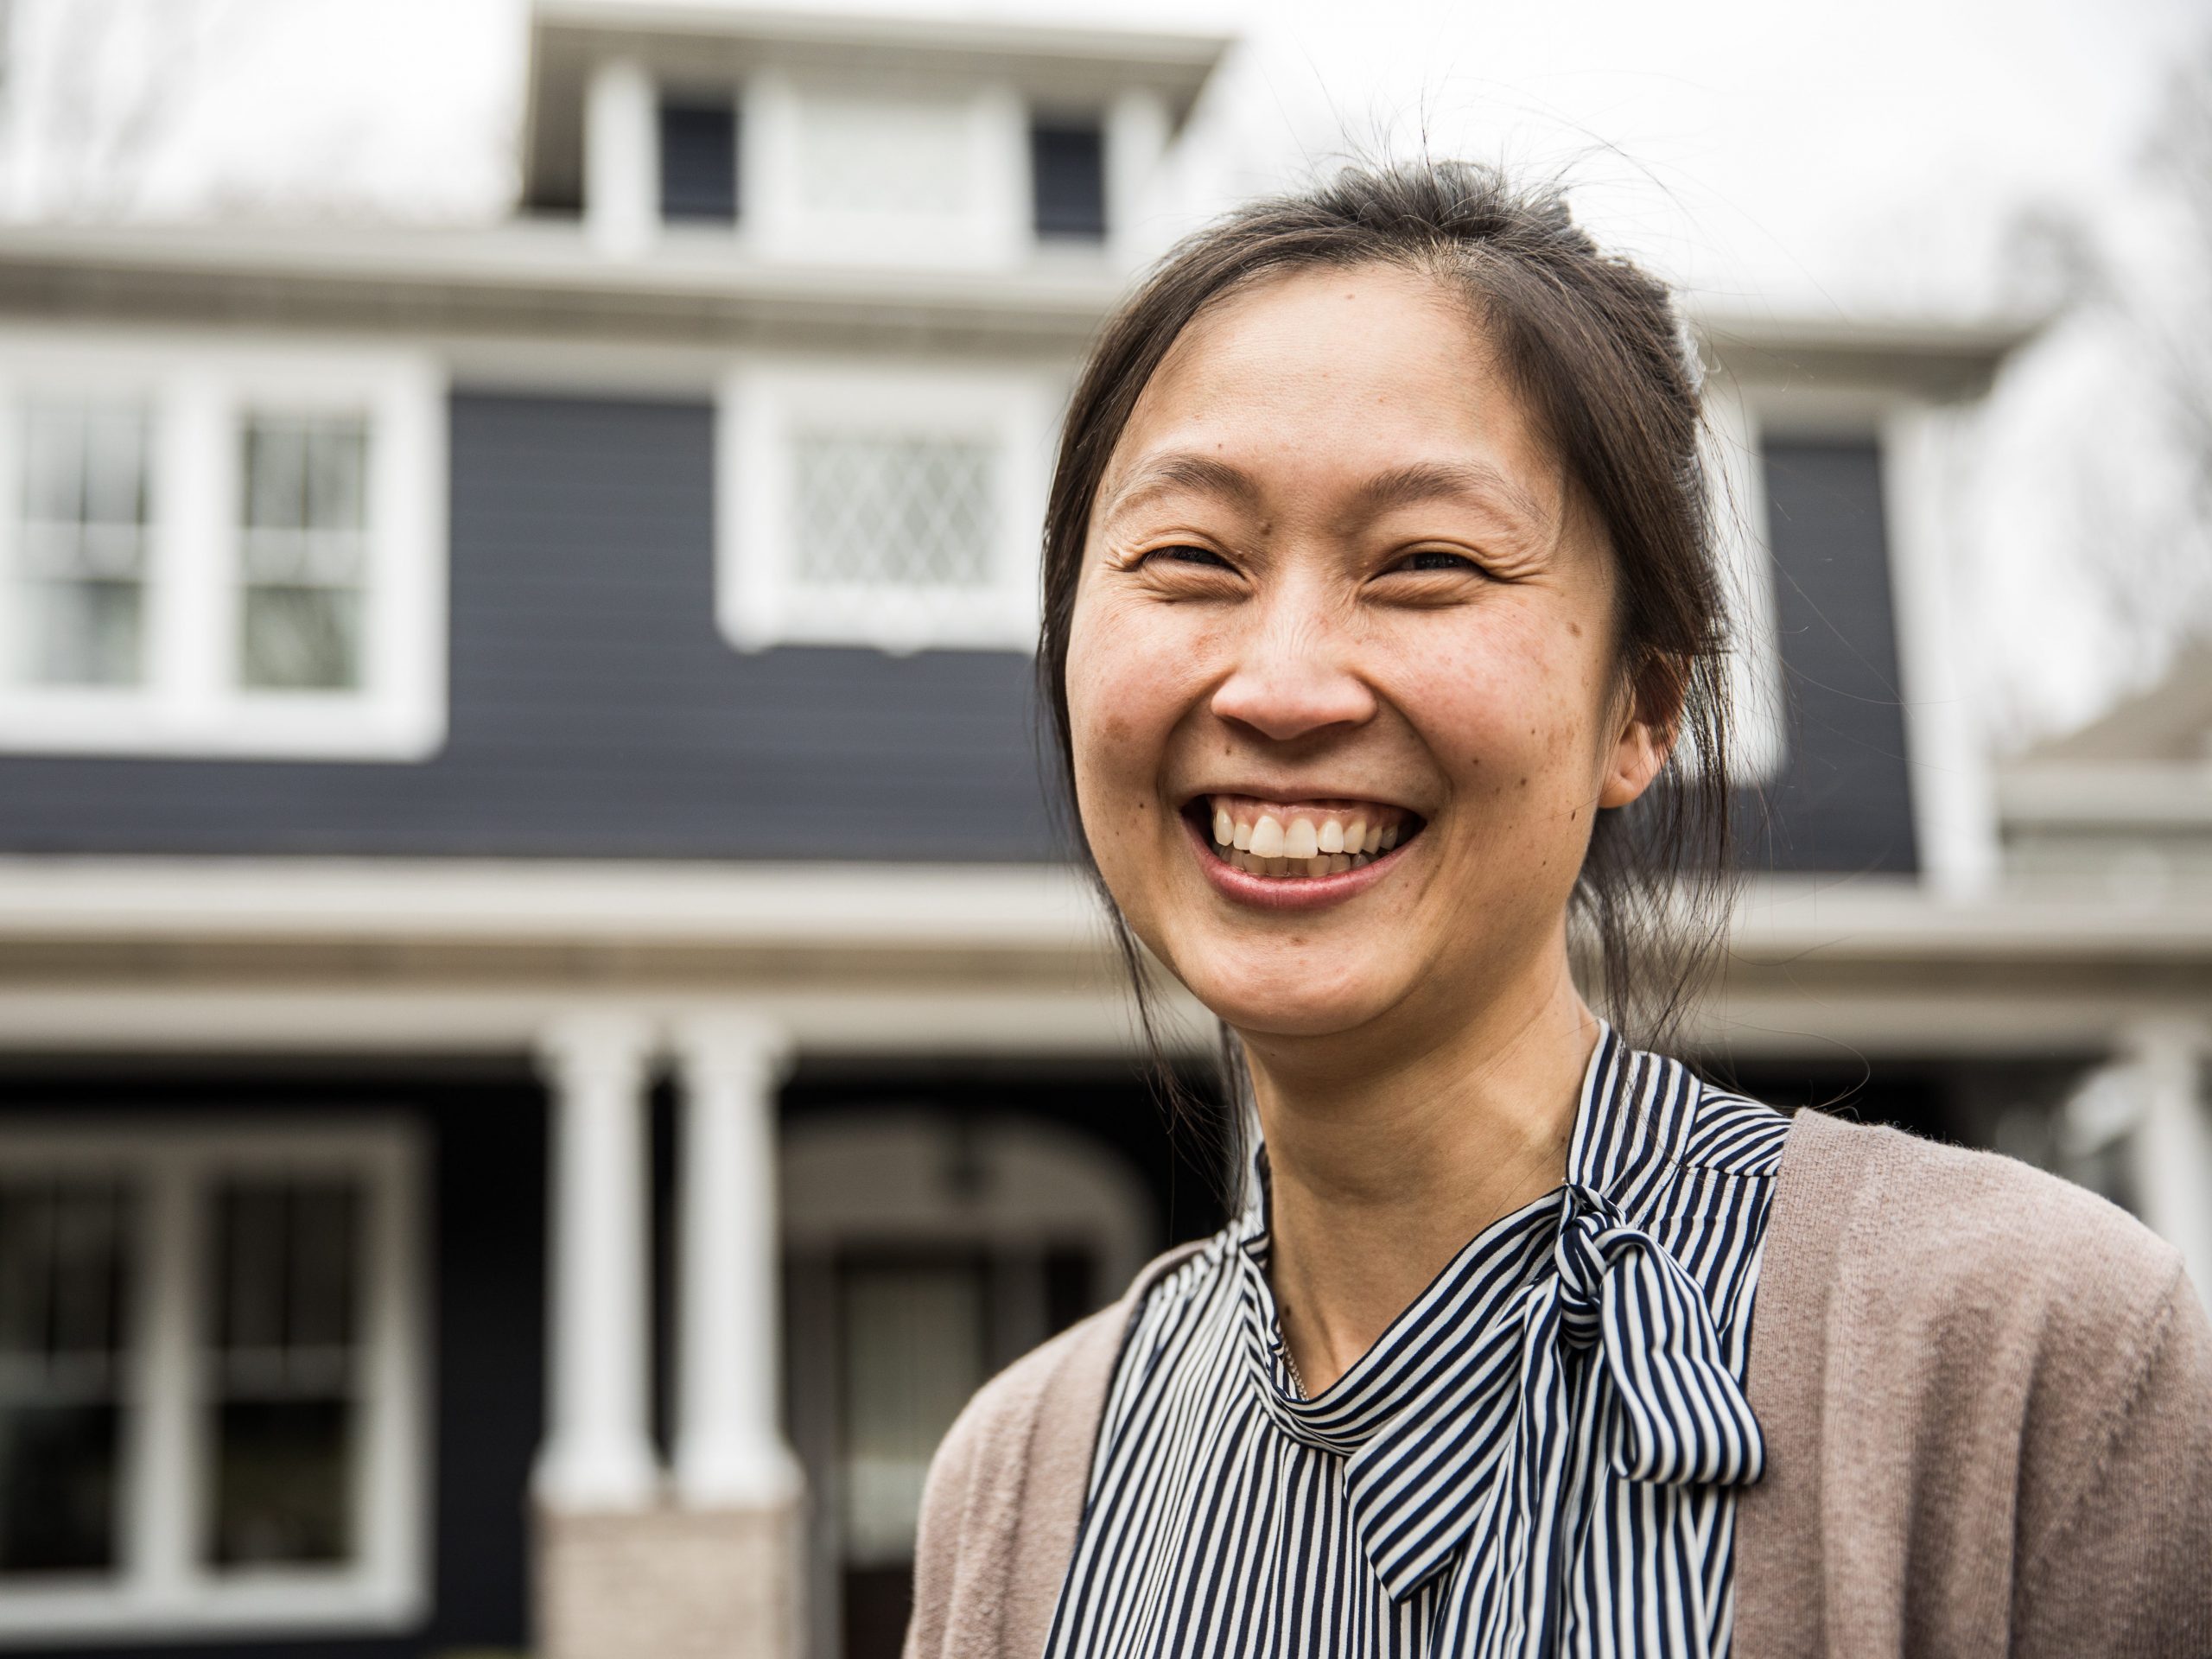 Woman smiling in front of house.